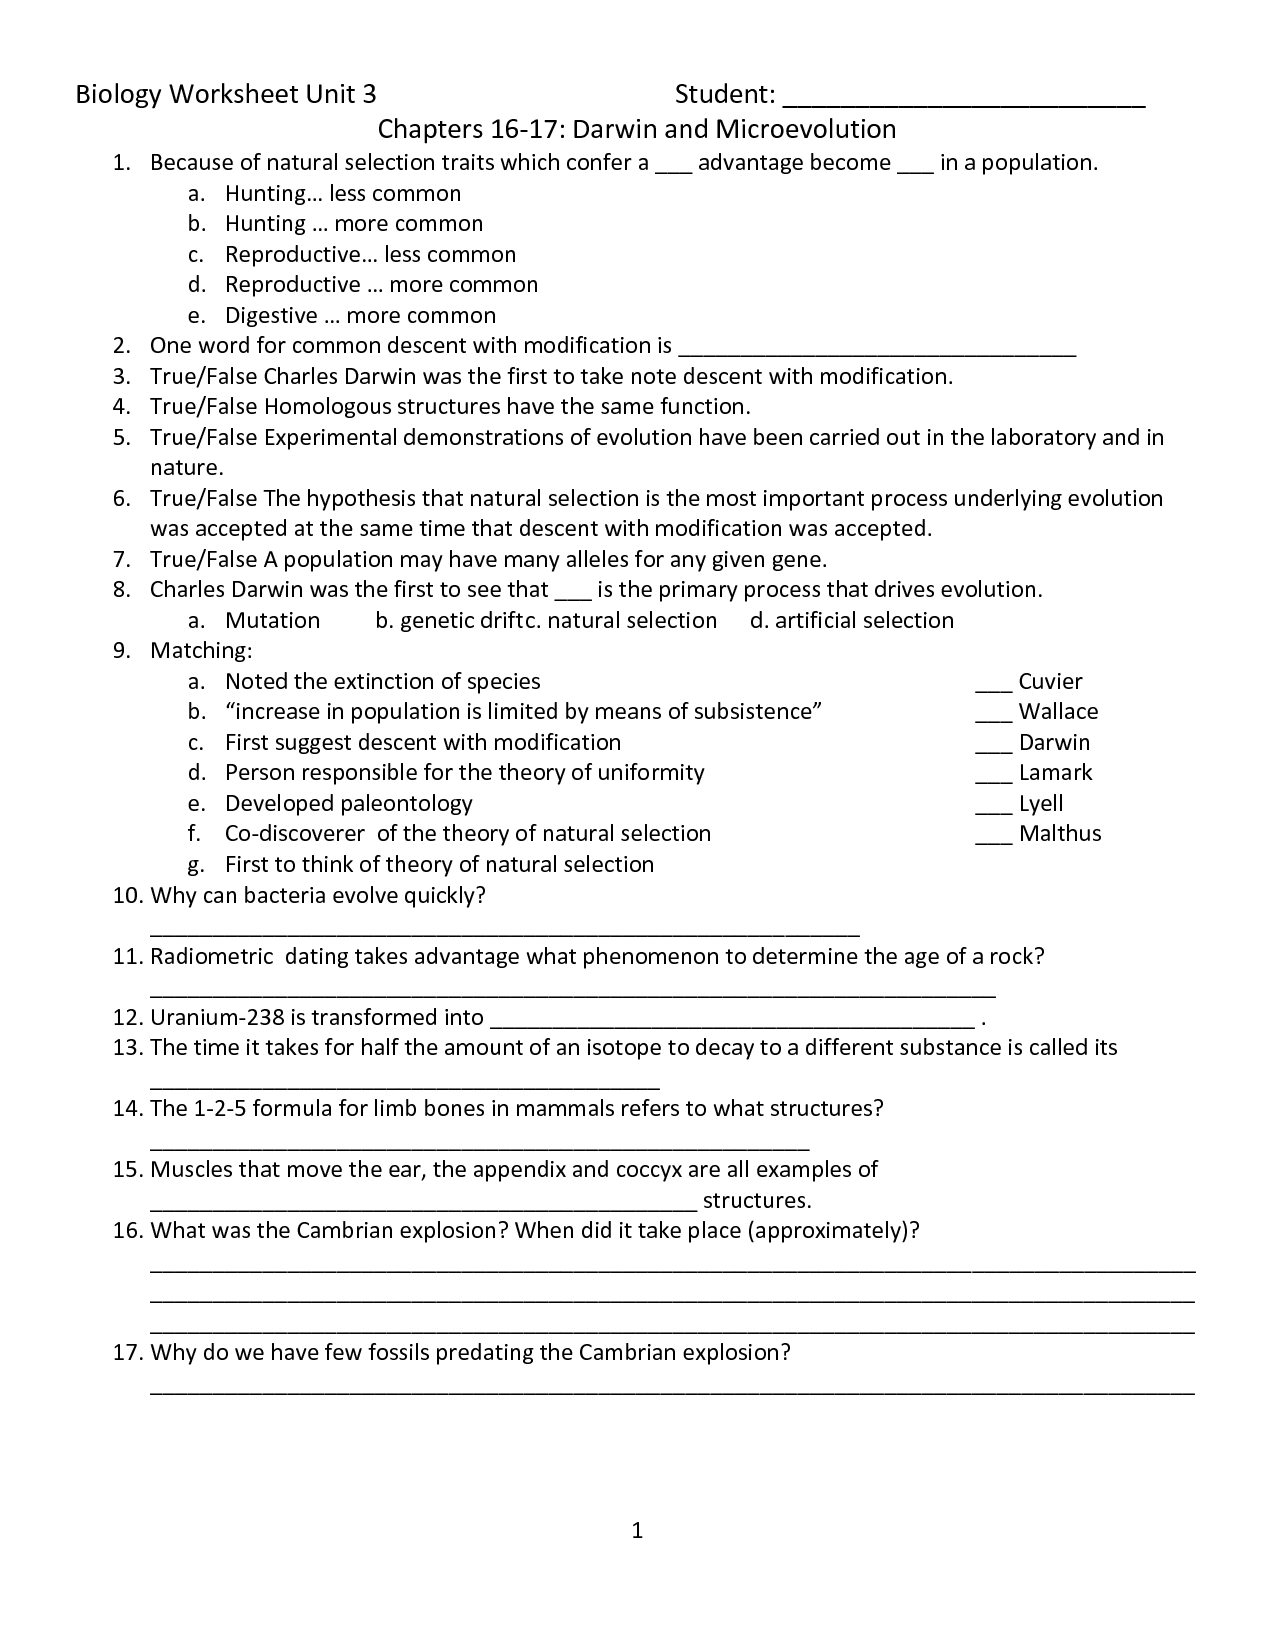 12 Best Images of Evolution Worksheet With Answer Key - Theory of